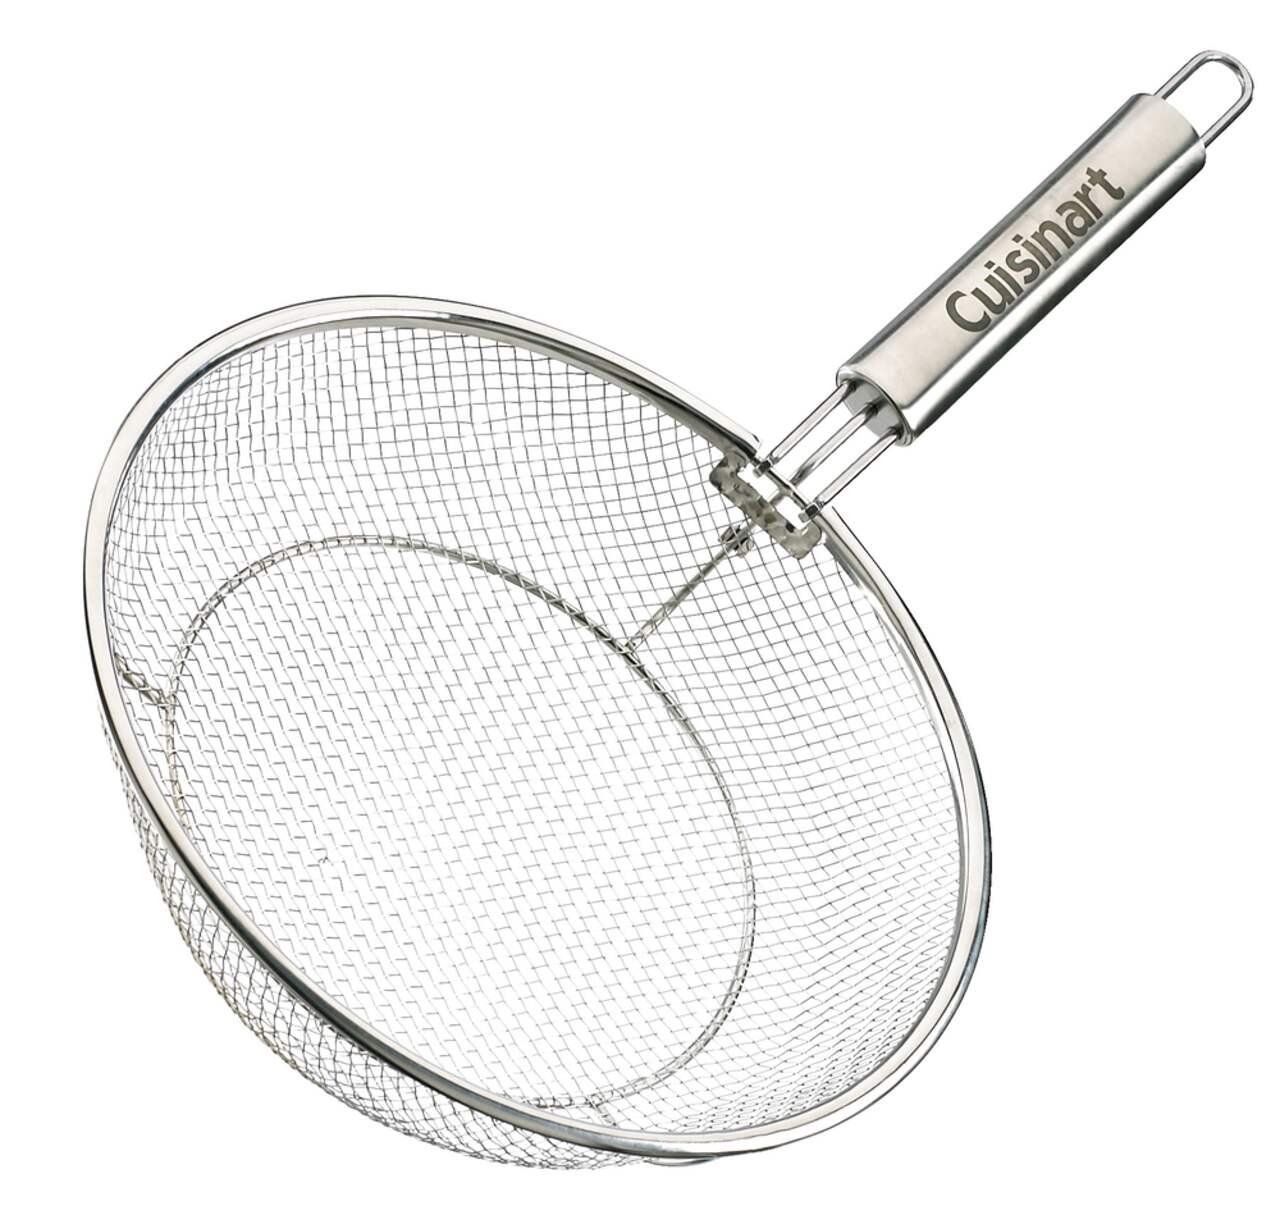 https://media-www.canadiantire.ca/product/seasonal-gardening/backyard-living/outdoor-cooking-accessories/0851753/cuisinart-mesh-grilling-basket-with-handle-c2f53293-c7ed-40b9-987d-2471adf419d4.png?imdensity=1&imwidth=640&impolicy=mZoom